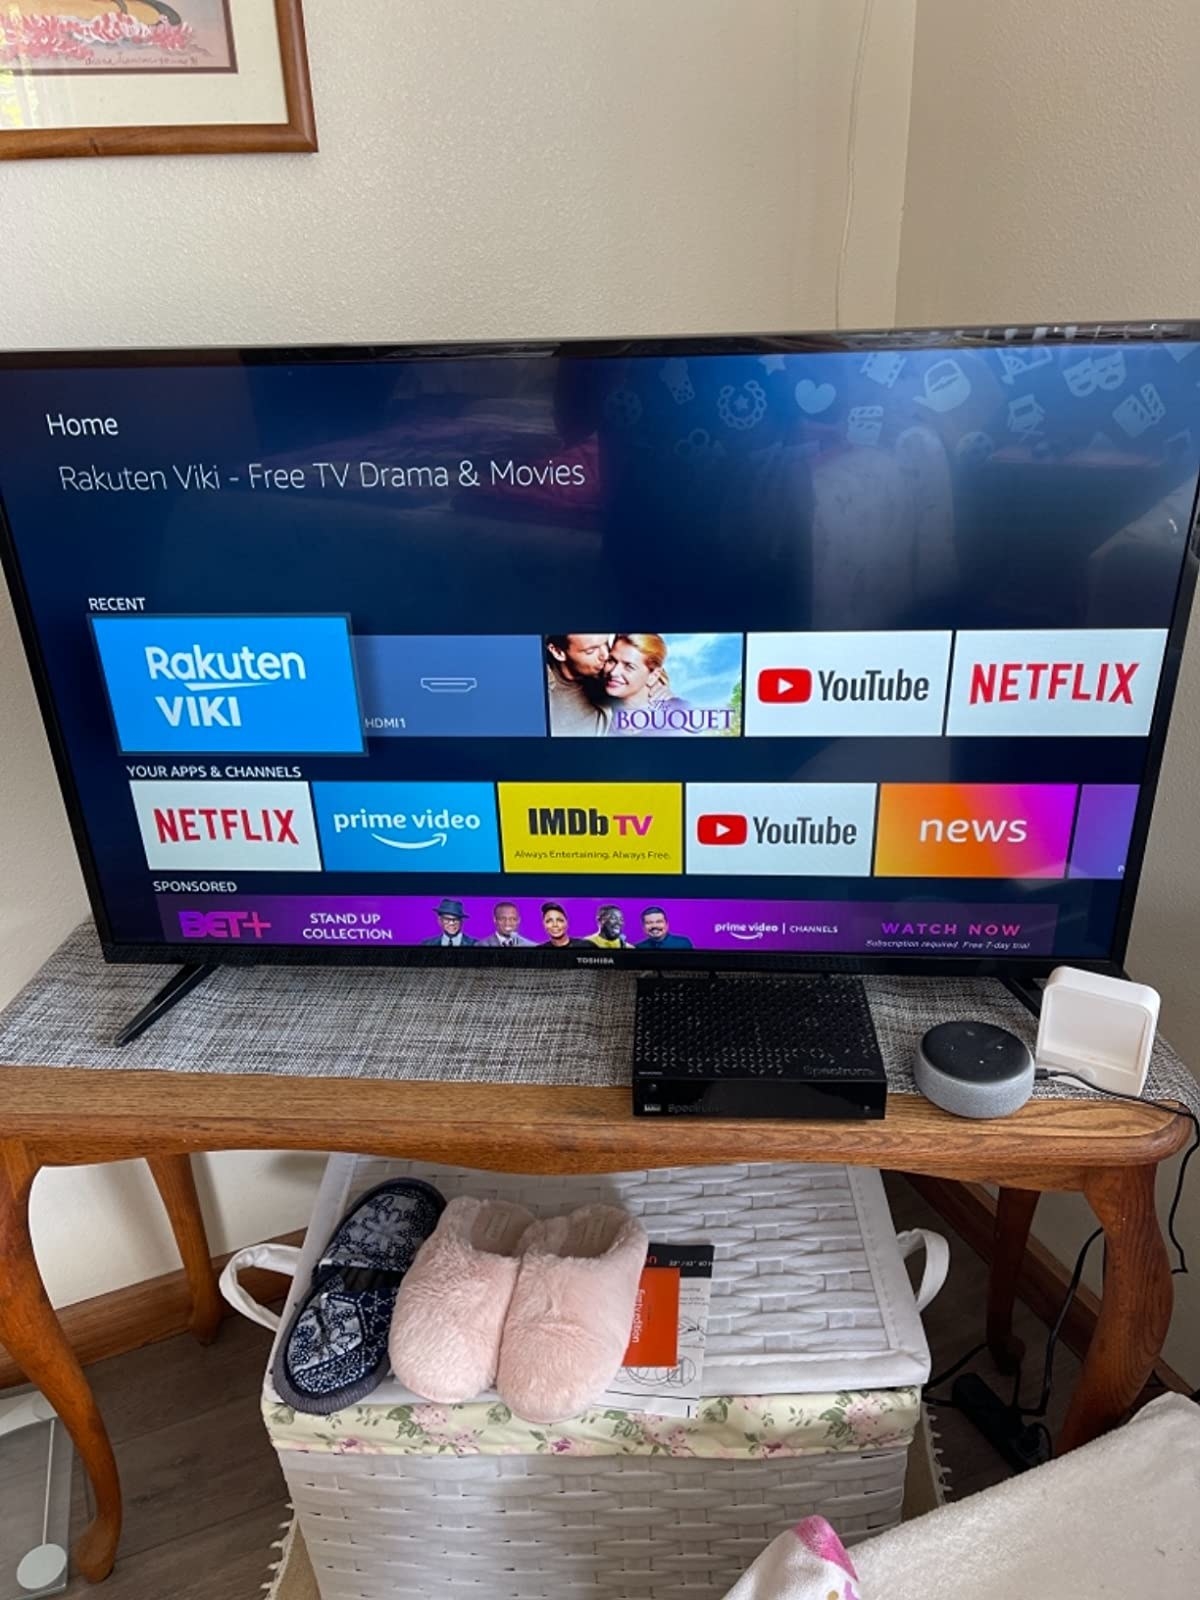 reviewer photo of the TV on a TV stand displaying the Rakuten Viki home page